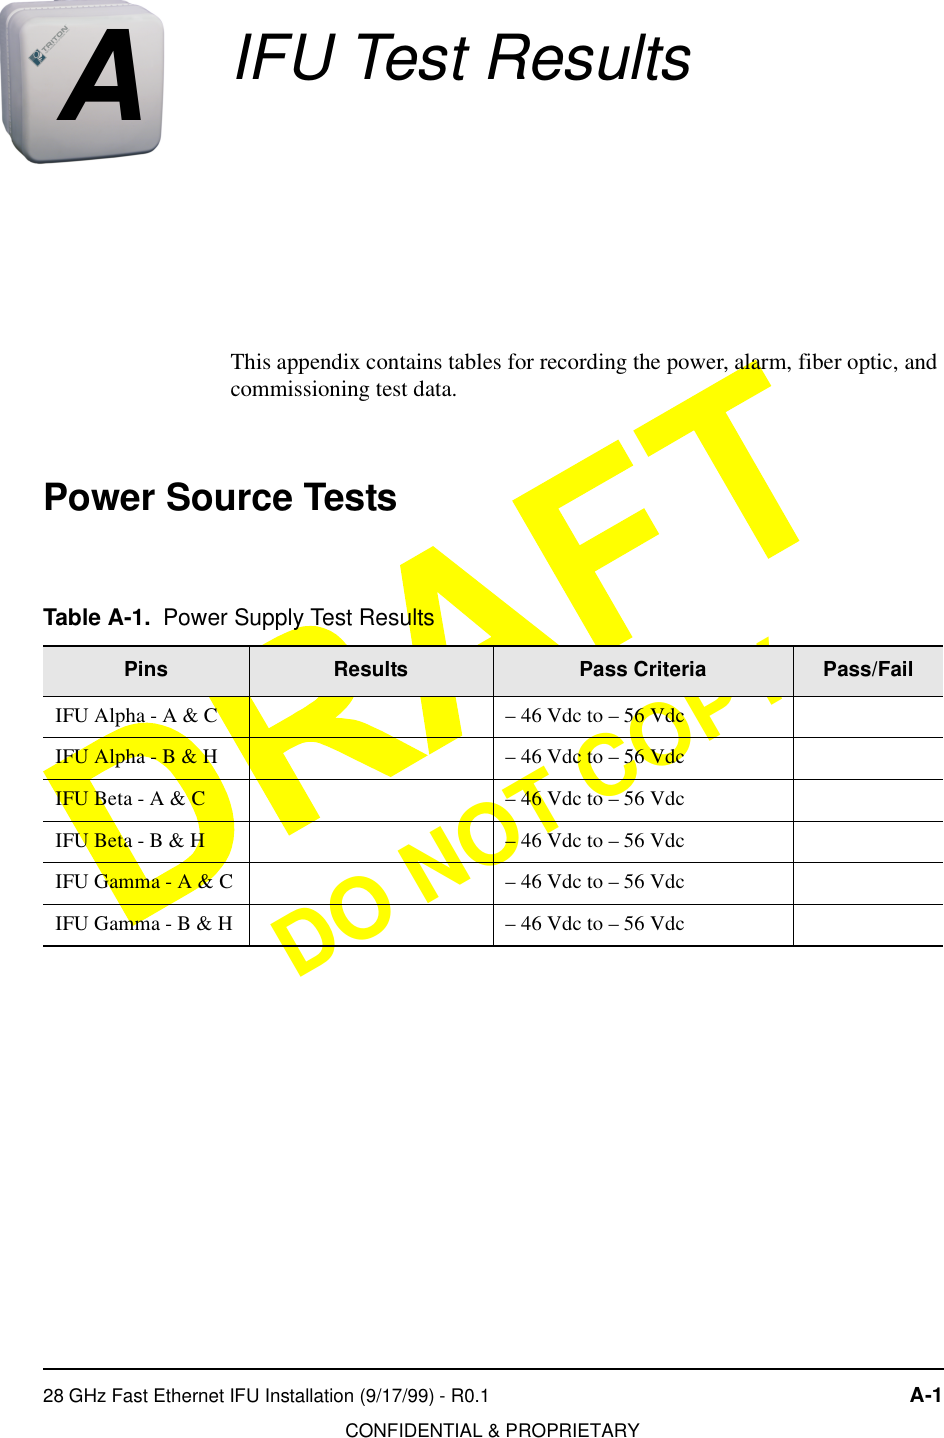 28 GHz Fast Ethernet IFU Installation (9/17/99) - R0.1 A-1CONFIDENTIAL &amp; PROPRIETARYDO NOT COPYAIFU Test ResultsThis appendix contains tables for recording the power, alarm, fiber optic, and commissioning test data.Power Source TestsTable A-1. Power Supply Test ResultsPins Results Pass Criteria Pass/FailIFU Alpha - A &amp; C – 46 Vdc to – 56 VdcIFU Alpha - B &amp; H – 46 Vdc to – 56 VdcIFU Beta - A &amp; C – 46 Vdc to – 56 VdcIFU Beta - B &amp; H – 46 Vdc to – 56 VdcIFU Gamma - A &amp; C – 46 Vdc to – 56 VdcIFU Gamma - B &amp; H – 46 Vdc to – 56 Vdc